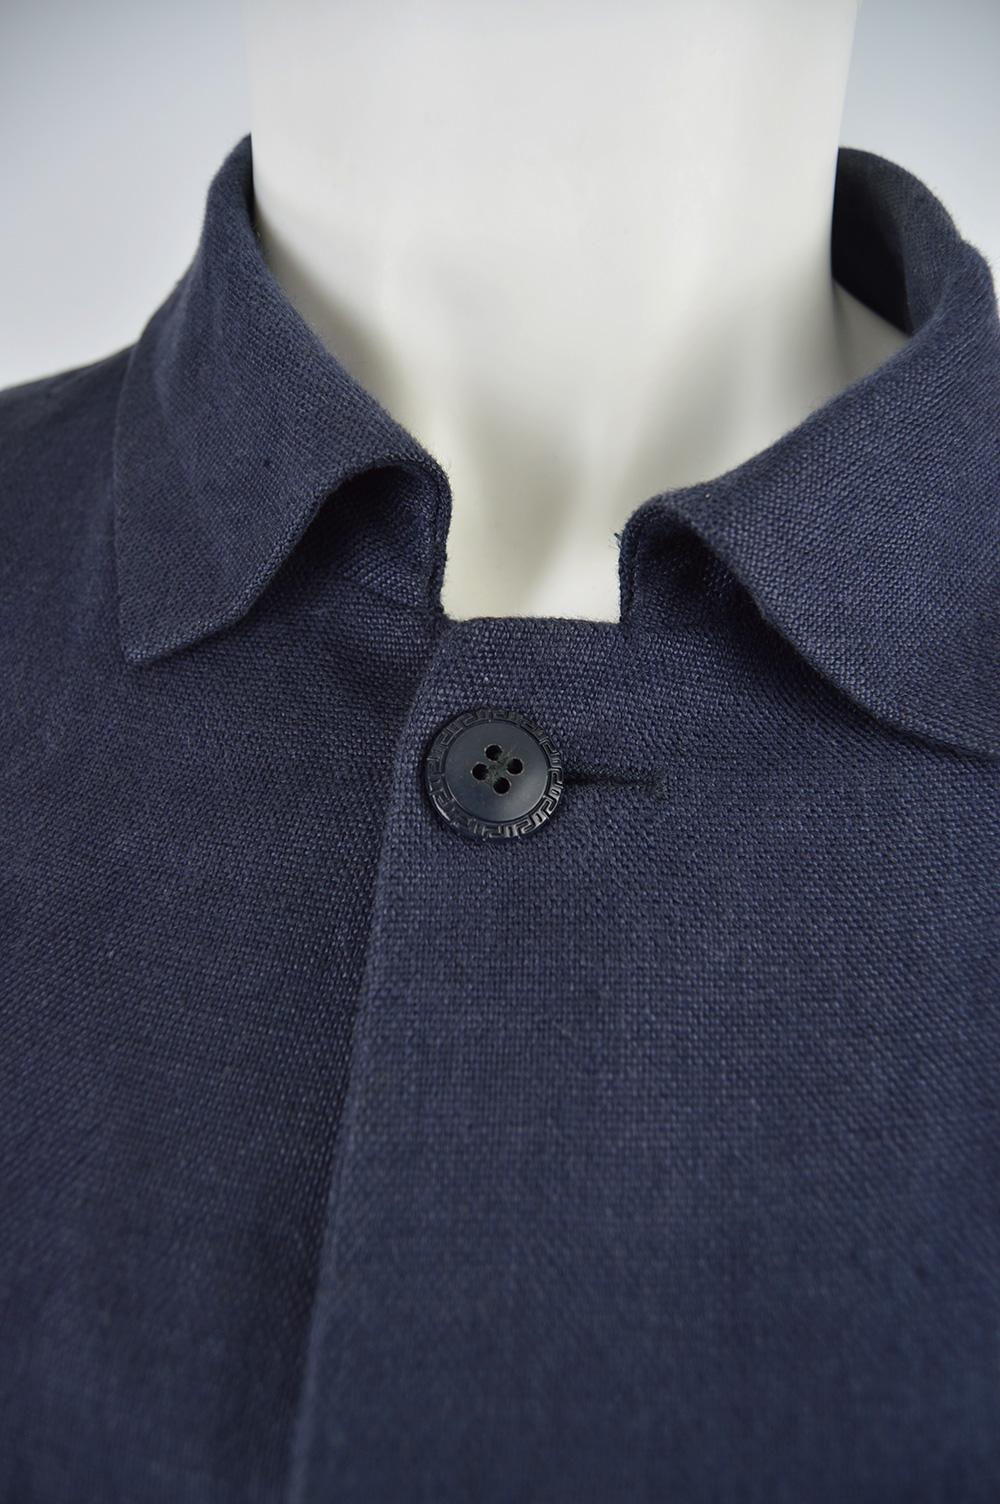 Gianni Versace Men's Vintage Dark Blue Linen Minimalist Chore Jacket In Good Condition For Sale In Doncaster, South Yorkshire